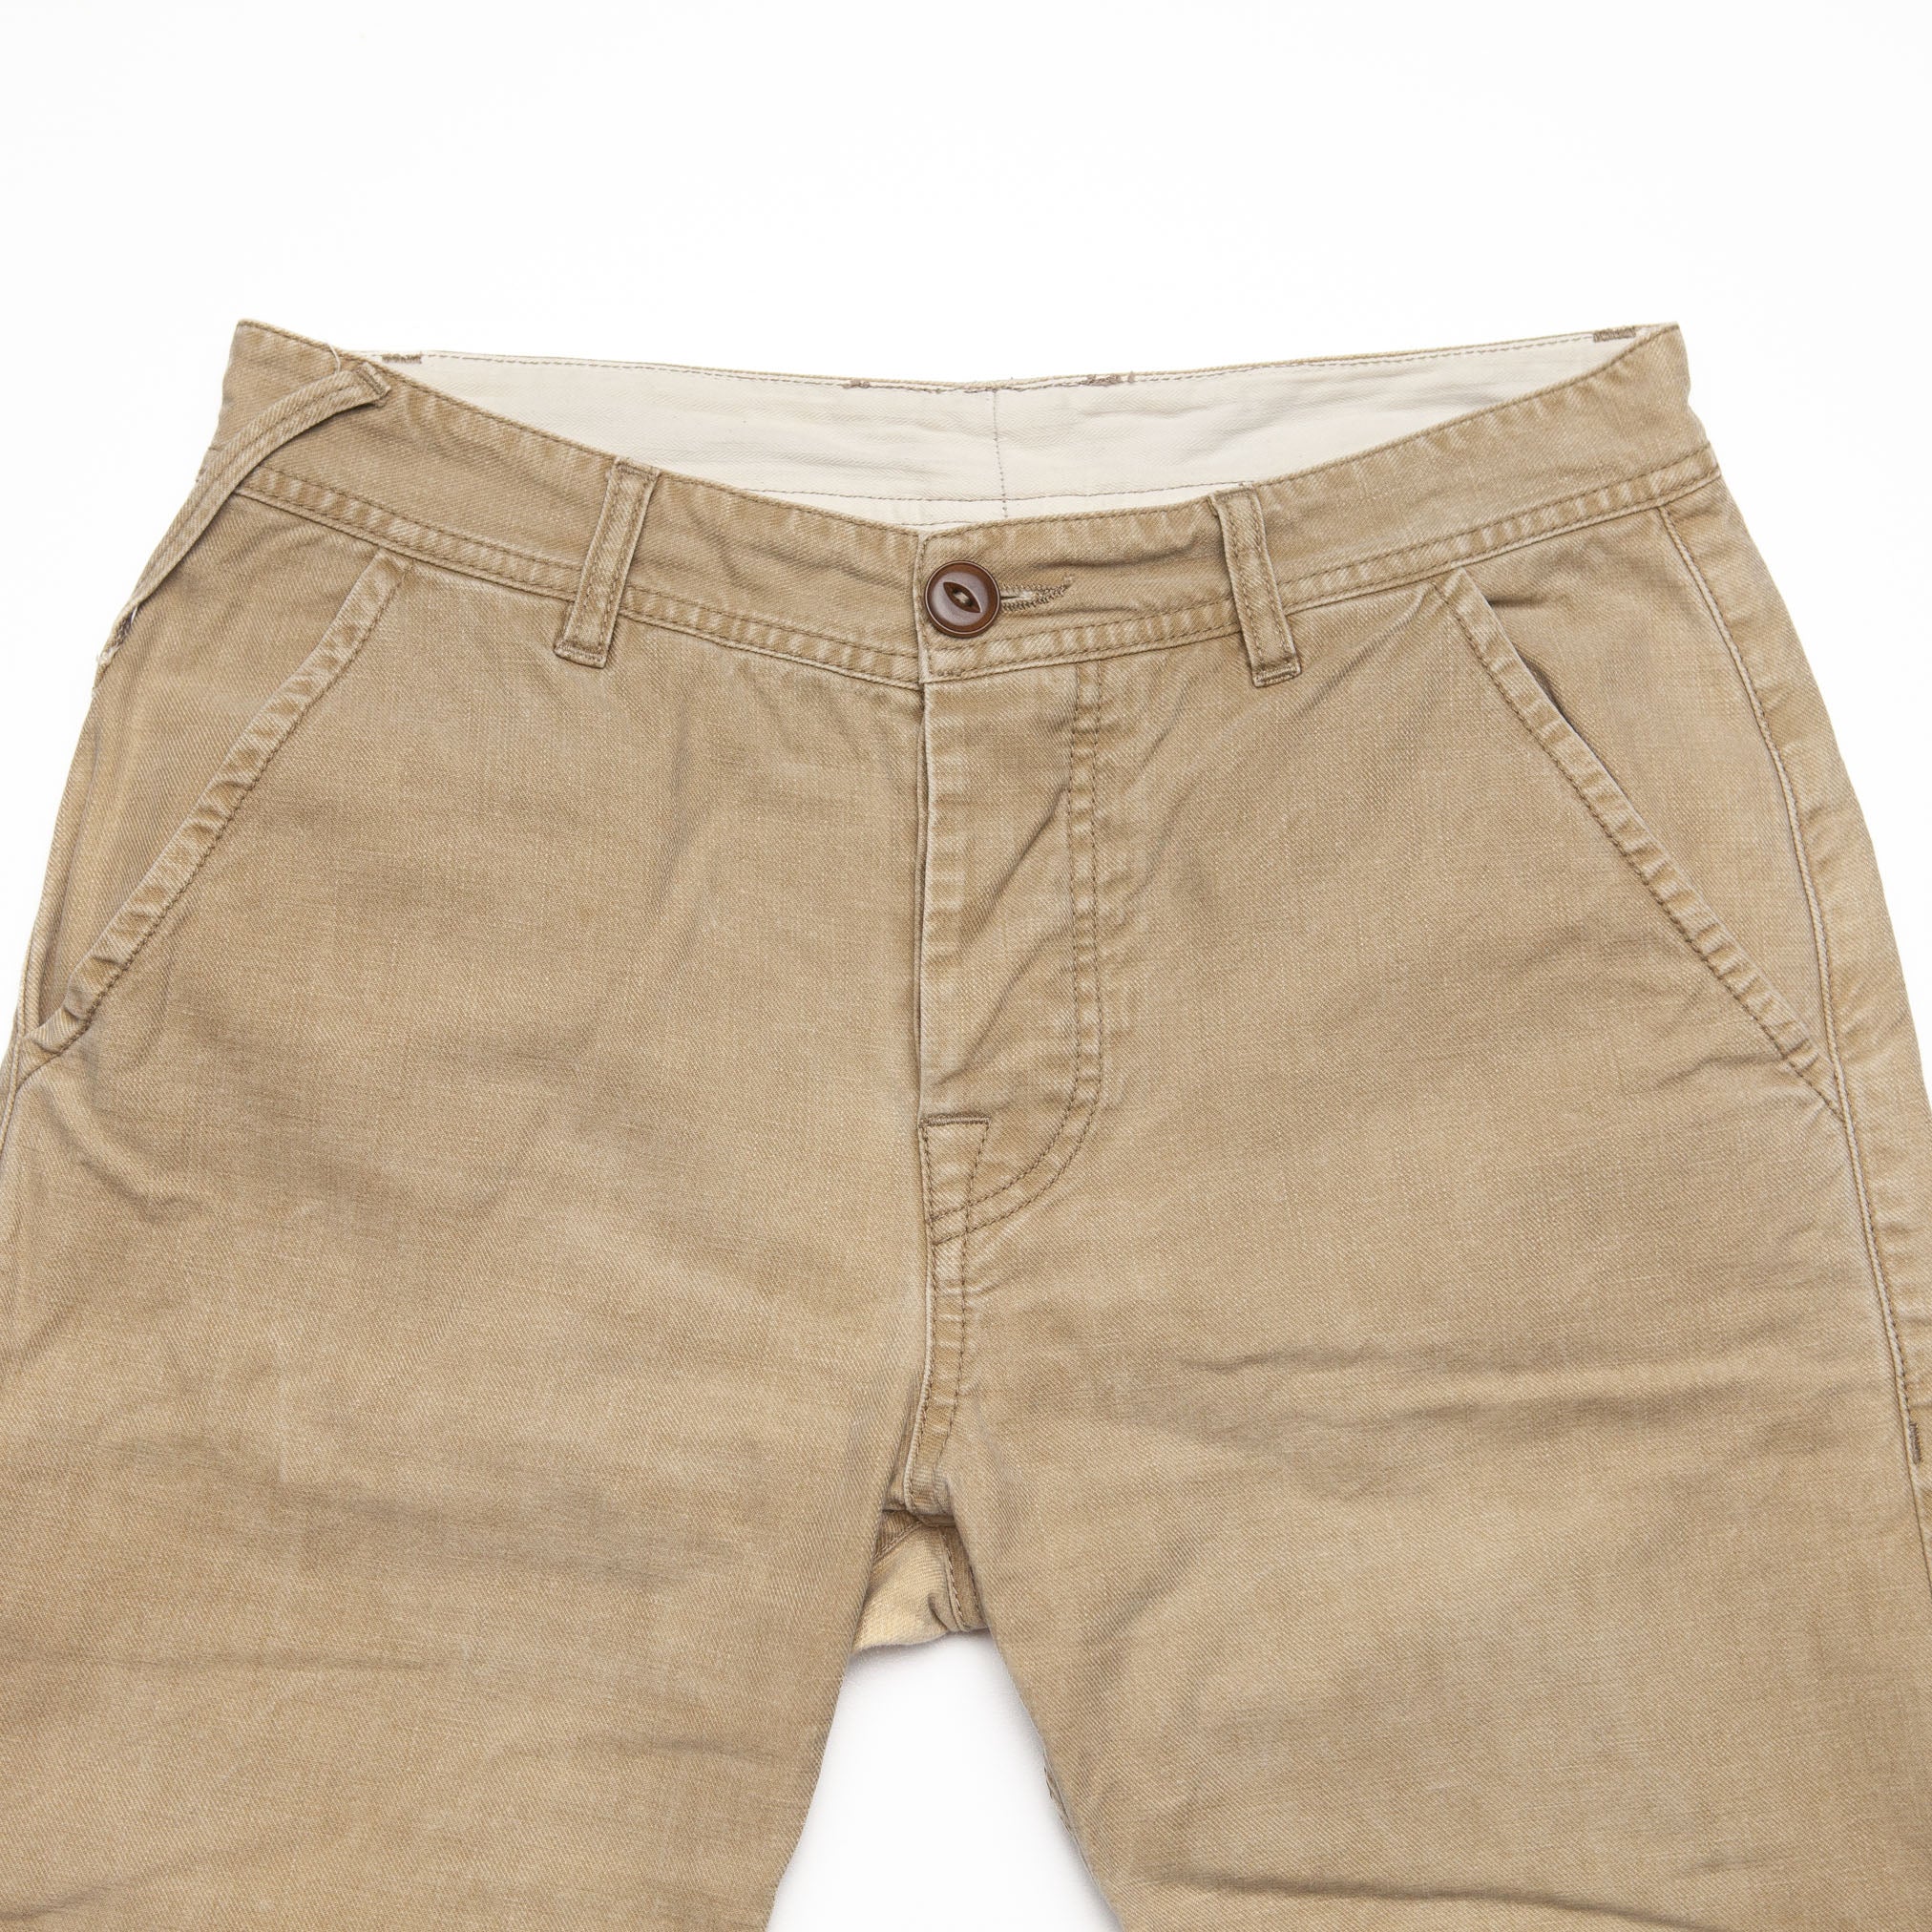 Chino 101 in Sand - 30